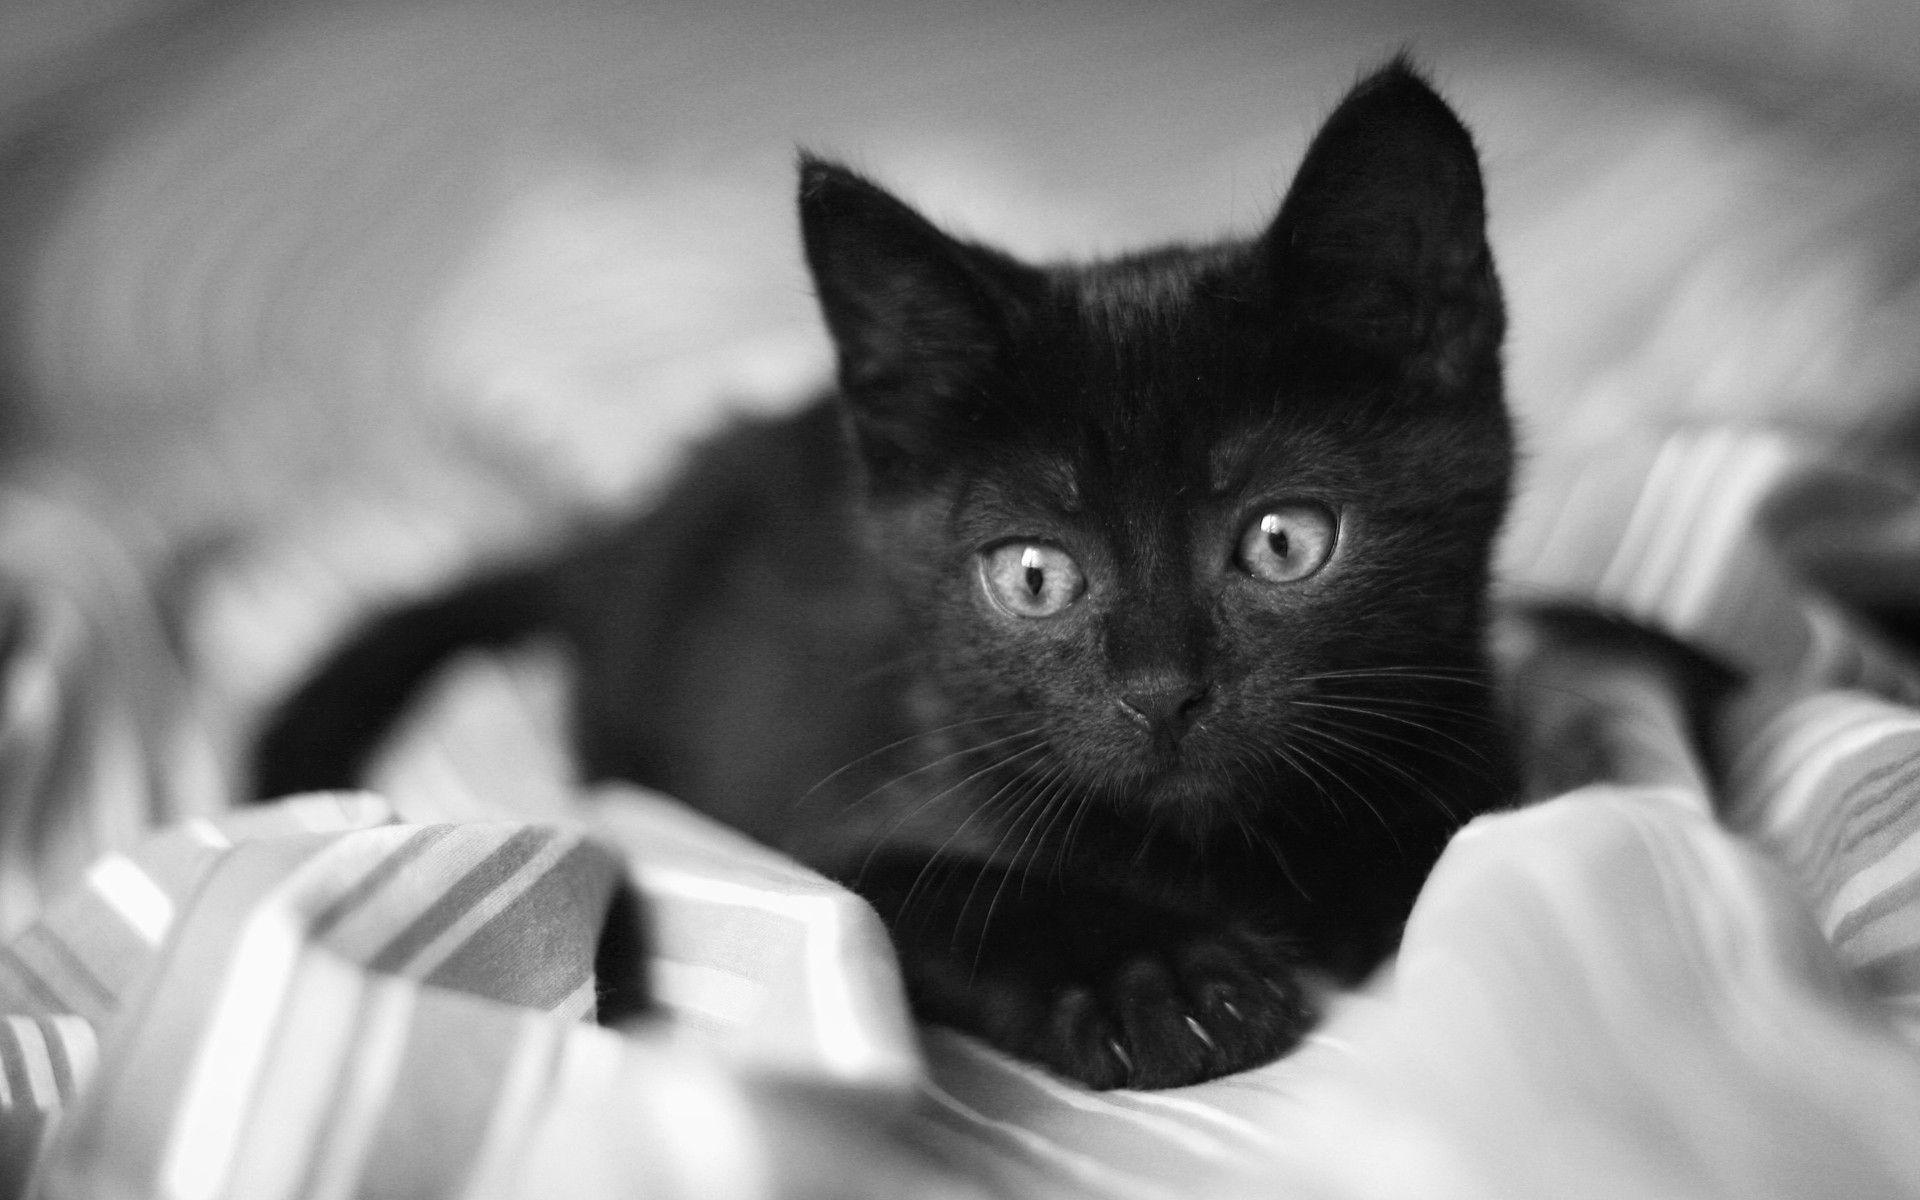 Kitten Images Black And White 3 Kittens For Sale 1 X Black And 2